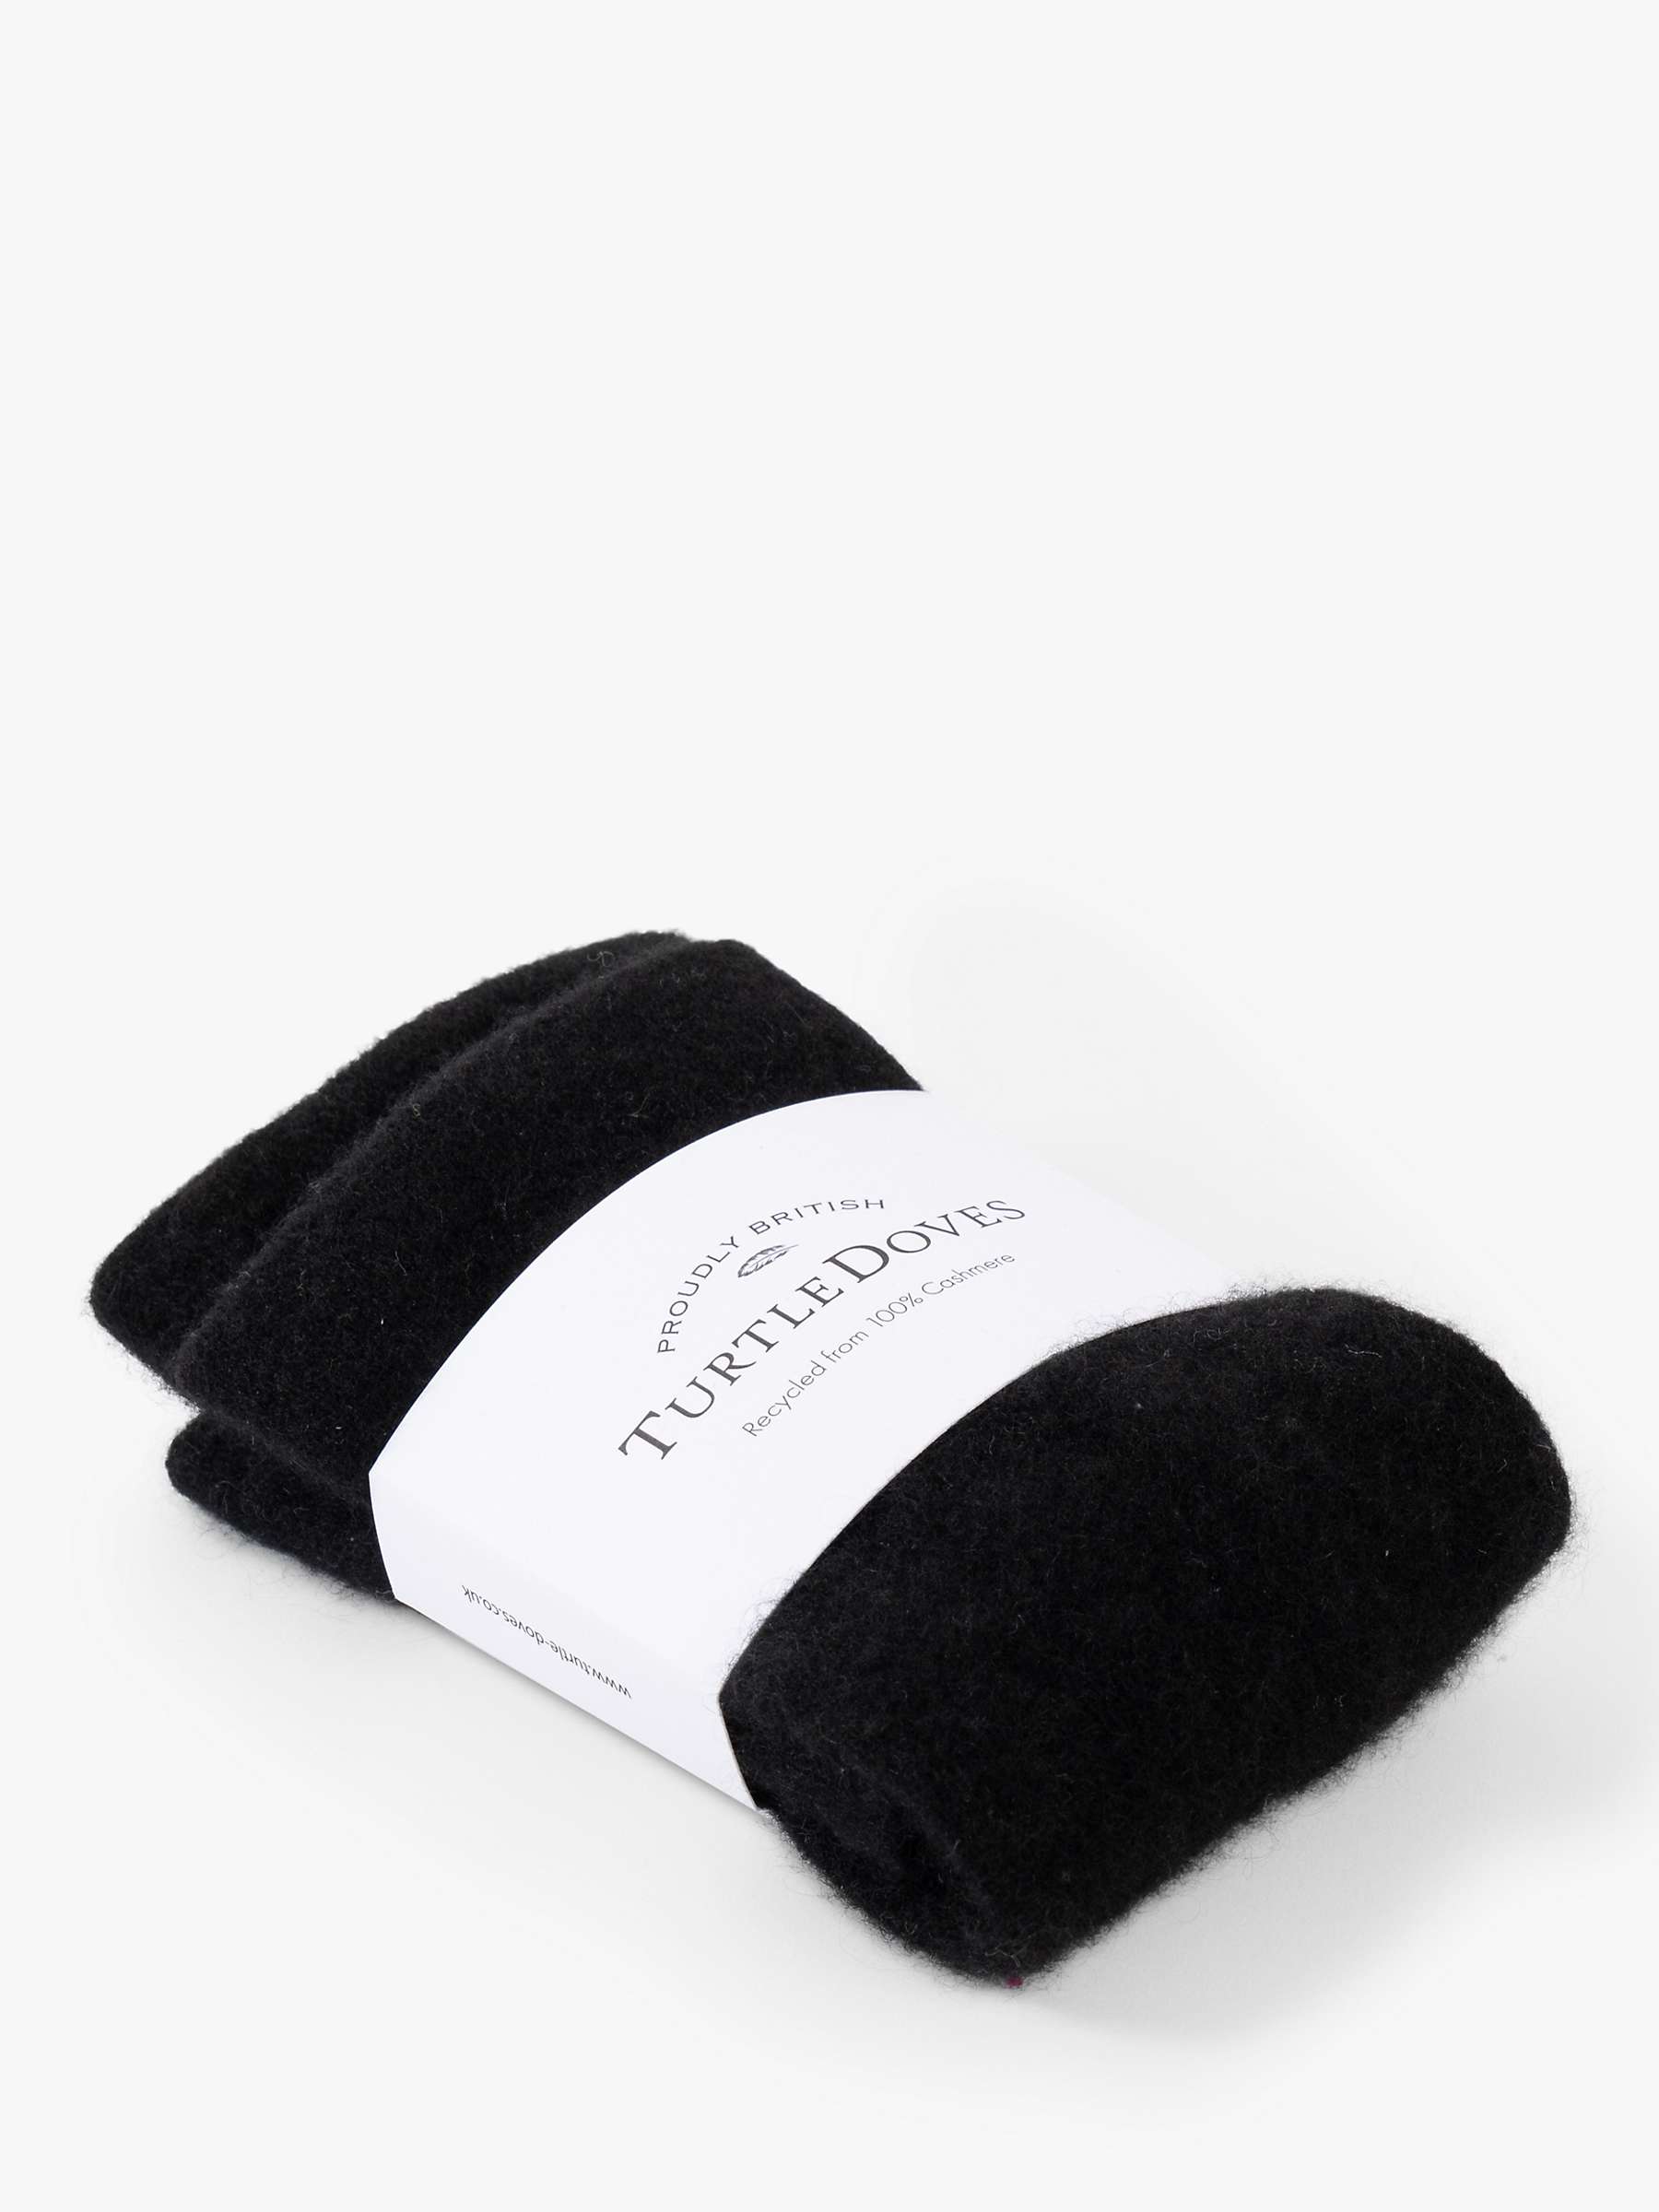 Buy Celtic & Co. Recycled Cashmere Wrist Warmers Online at johnlewis.com